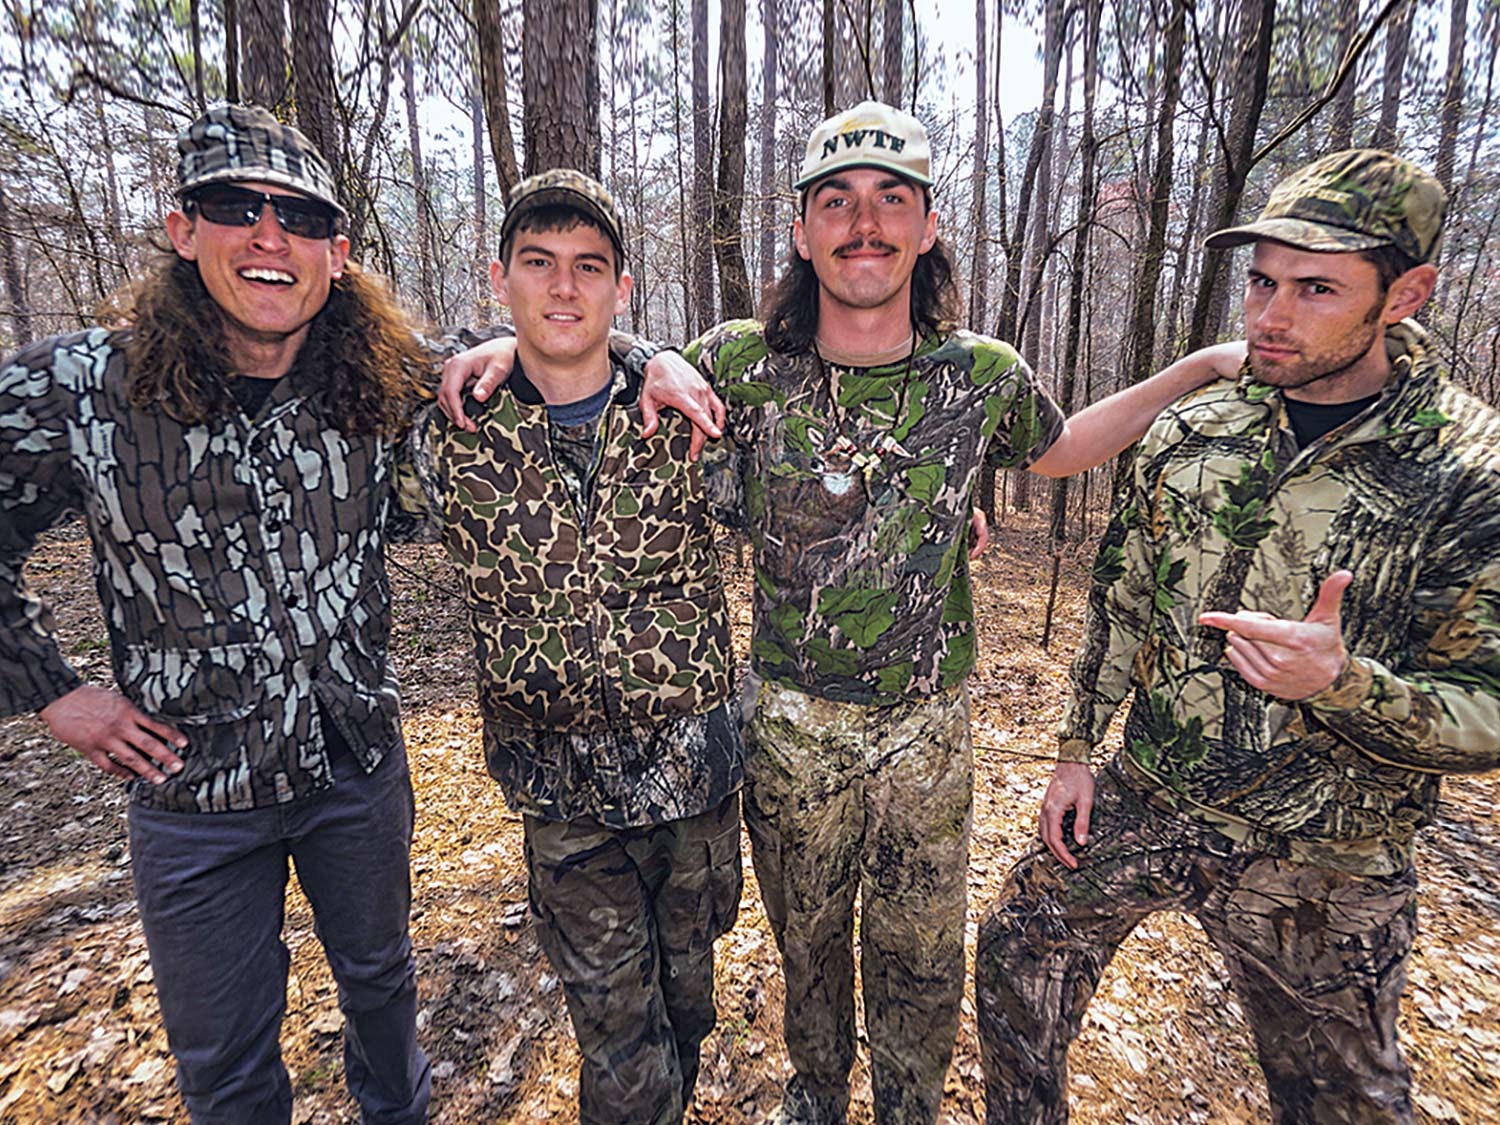 Four hunters in full  camo stand out in the woods, posing and smiling together.